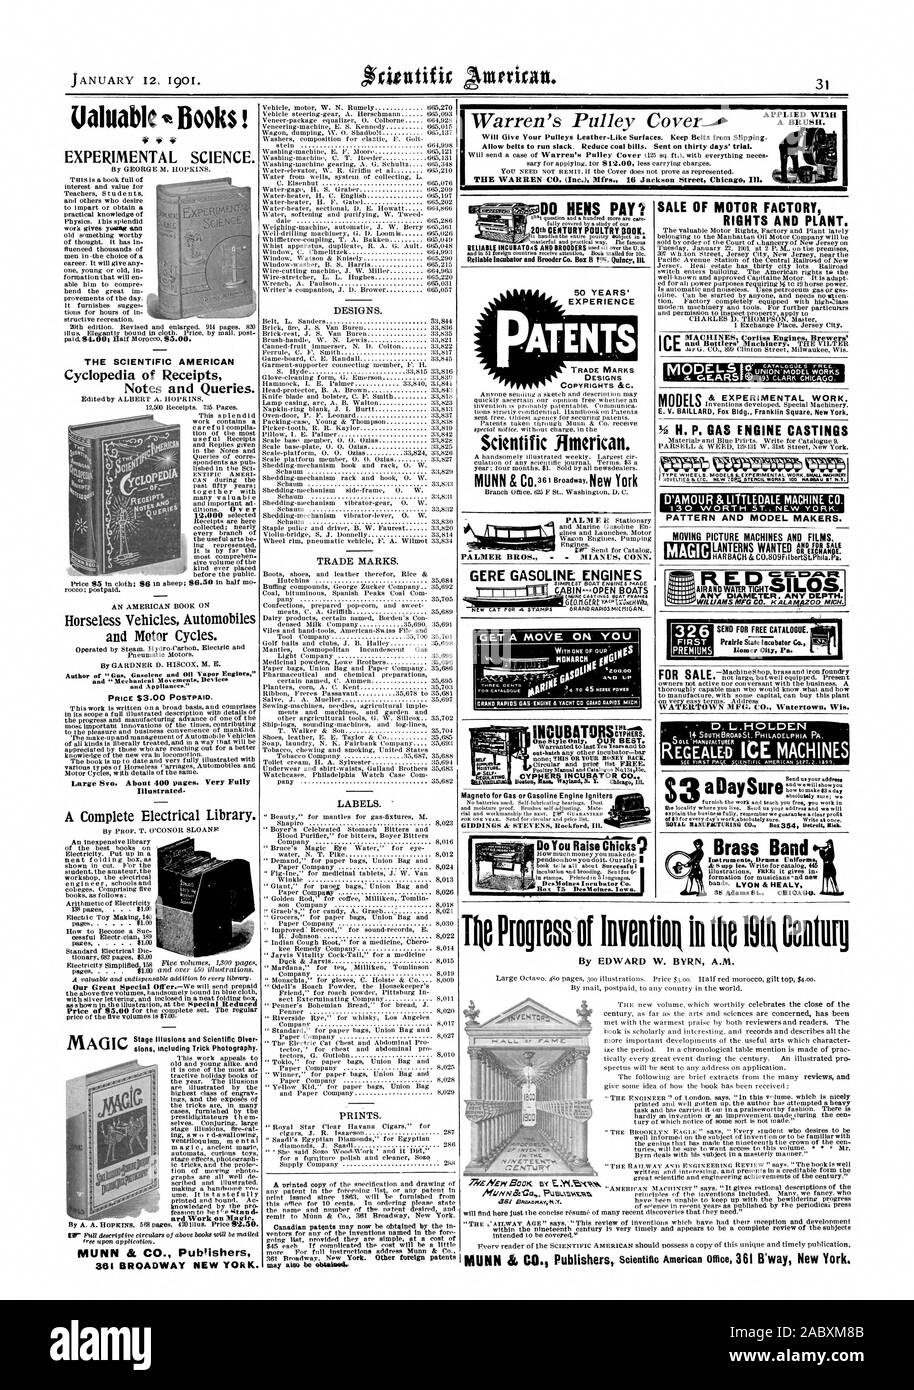 DESIGNS COPYRIGHTS &C. Scientific American. GERE GASOLINE ENGINES CABIN.-OPEN BOATS PALMER BROS. Tlits CIPHERS. One style only OUR BEST. SALE OF MOTOR FACTORY RIGHTS AND PLANT. & EXPERIMENTAL WORK. -  D. L.HOLDEN RiailtE6 ICE MACHINES H. P. GAS ENGINE CASTINGS IPAMOUR &LI TLEDALE MACHINE CO. PATTERN AND MODEL MAKERS. MOVING PICTURE MACHINES AND FILMS. ANY DIAMETER ANY DEPTH: 326 FIRST PREMIUMS SEND FOR FREE CATALOGUE. Homer City Pa. MAGIC MODELS Brass Band a Day Sure/WARHI TIM CENTUIrf, 1901-01-12 Stock Photo